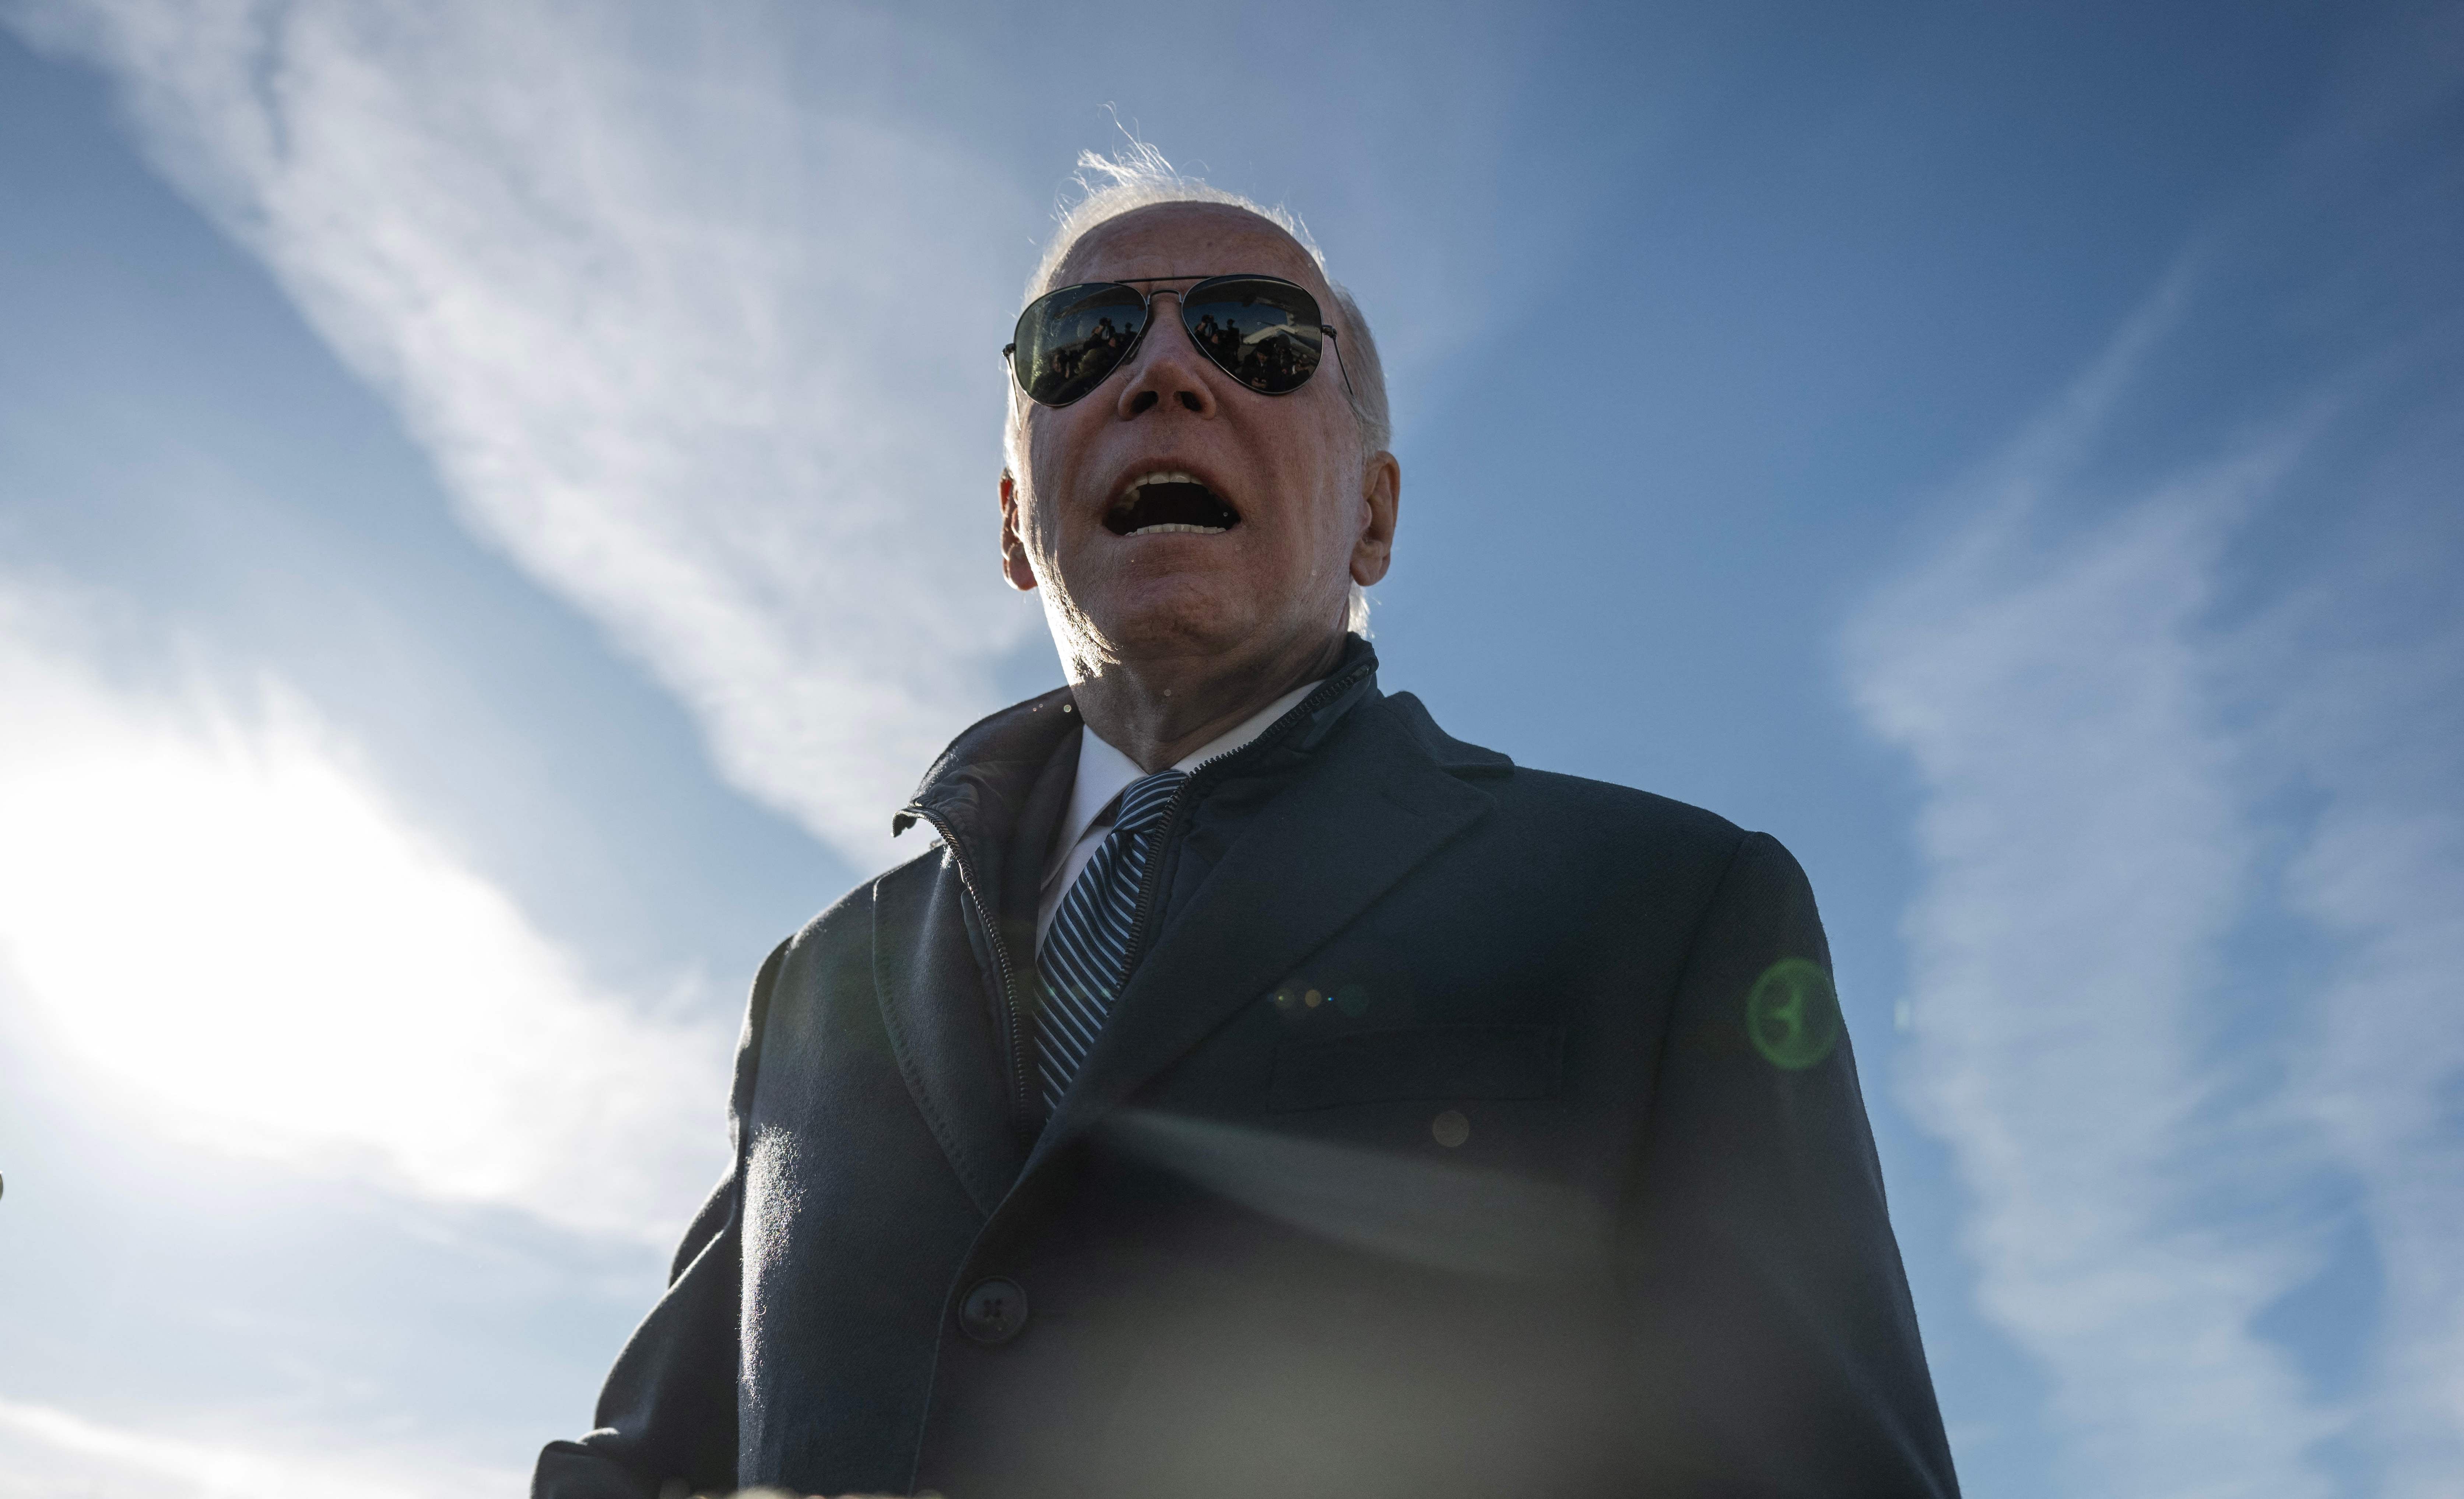 Biden administration officials are seizing to take control of the narrative as Joe Biden came under attack from Republicans over his handling of the incursion of the balloon into US airspace